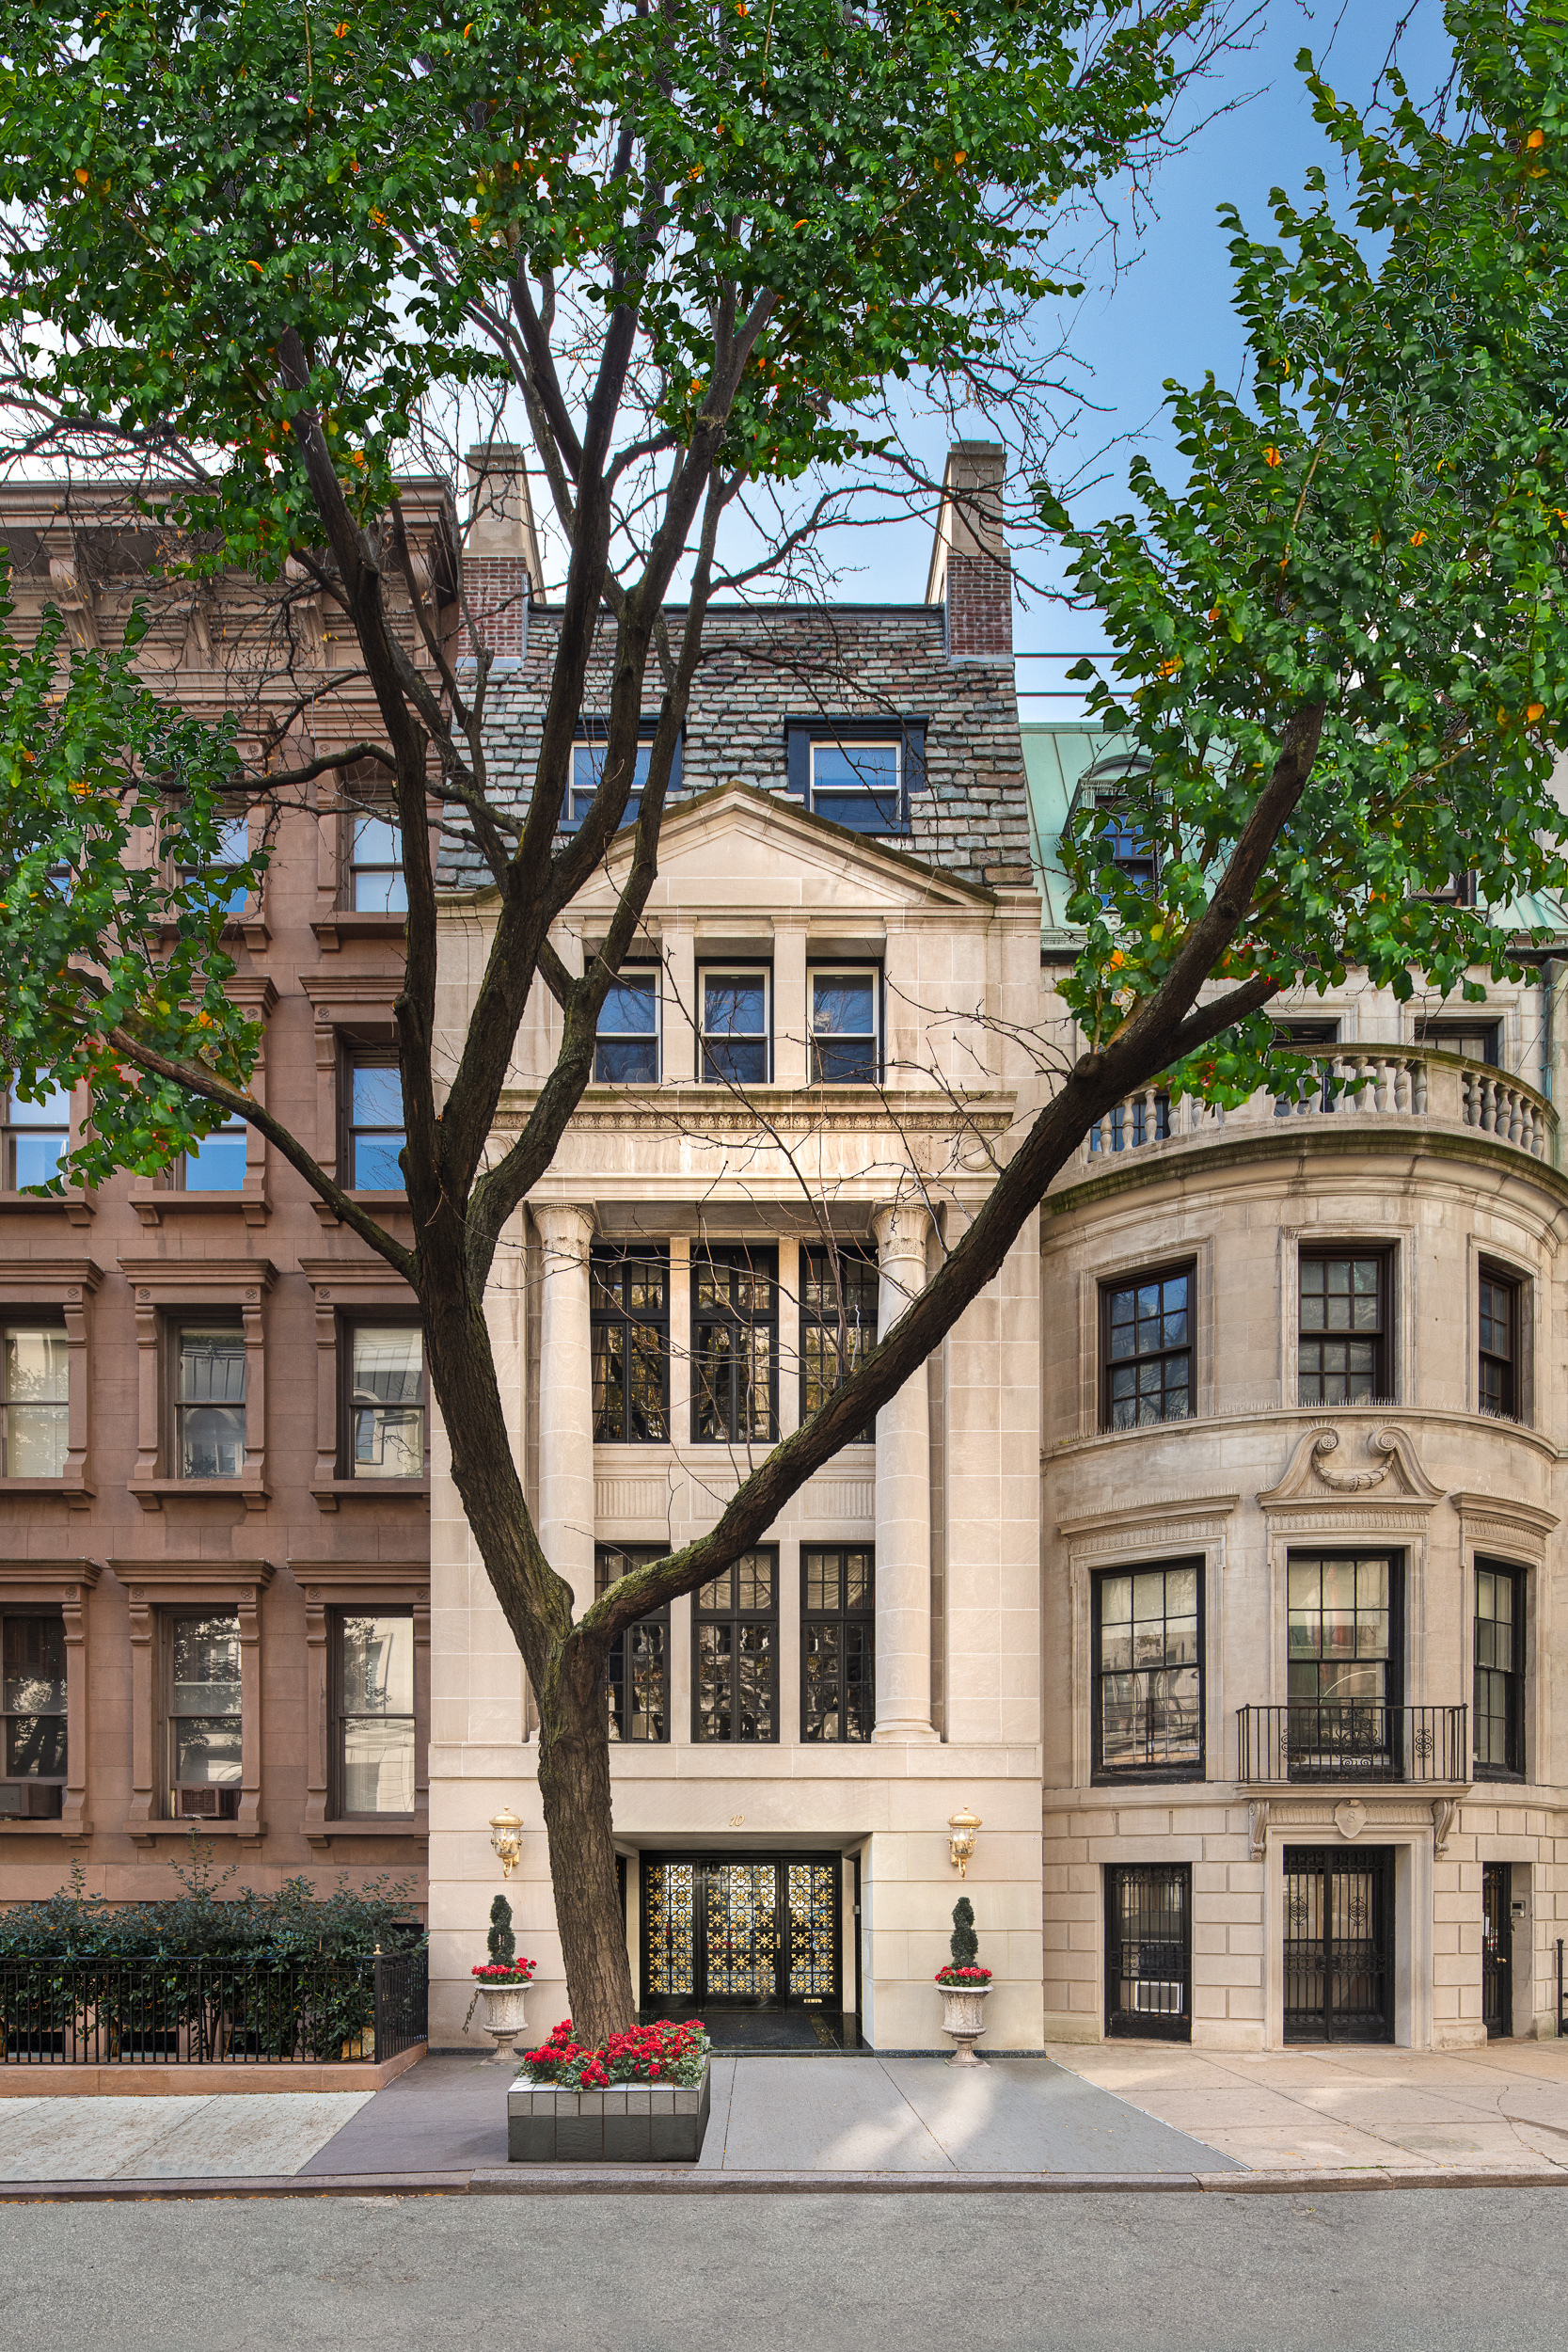 10 East 64th Street Th, Lenox Hill, Upper East Side, NYC - 5 Bedrooms  
5.5 Bathrooms  
17 Rooms - 